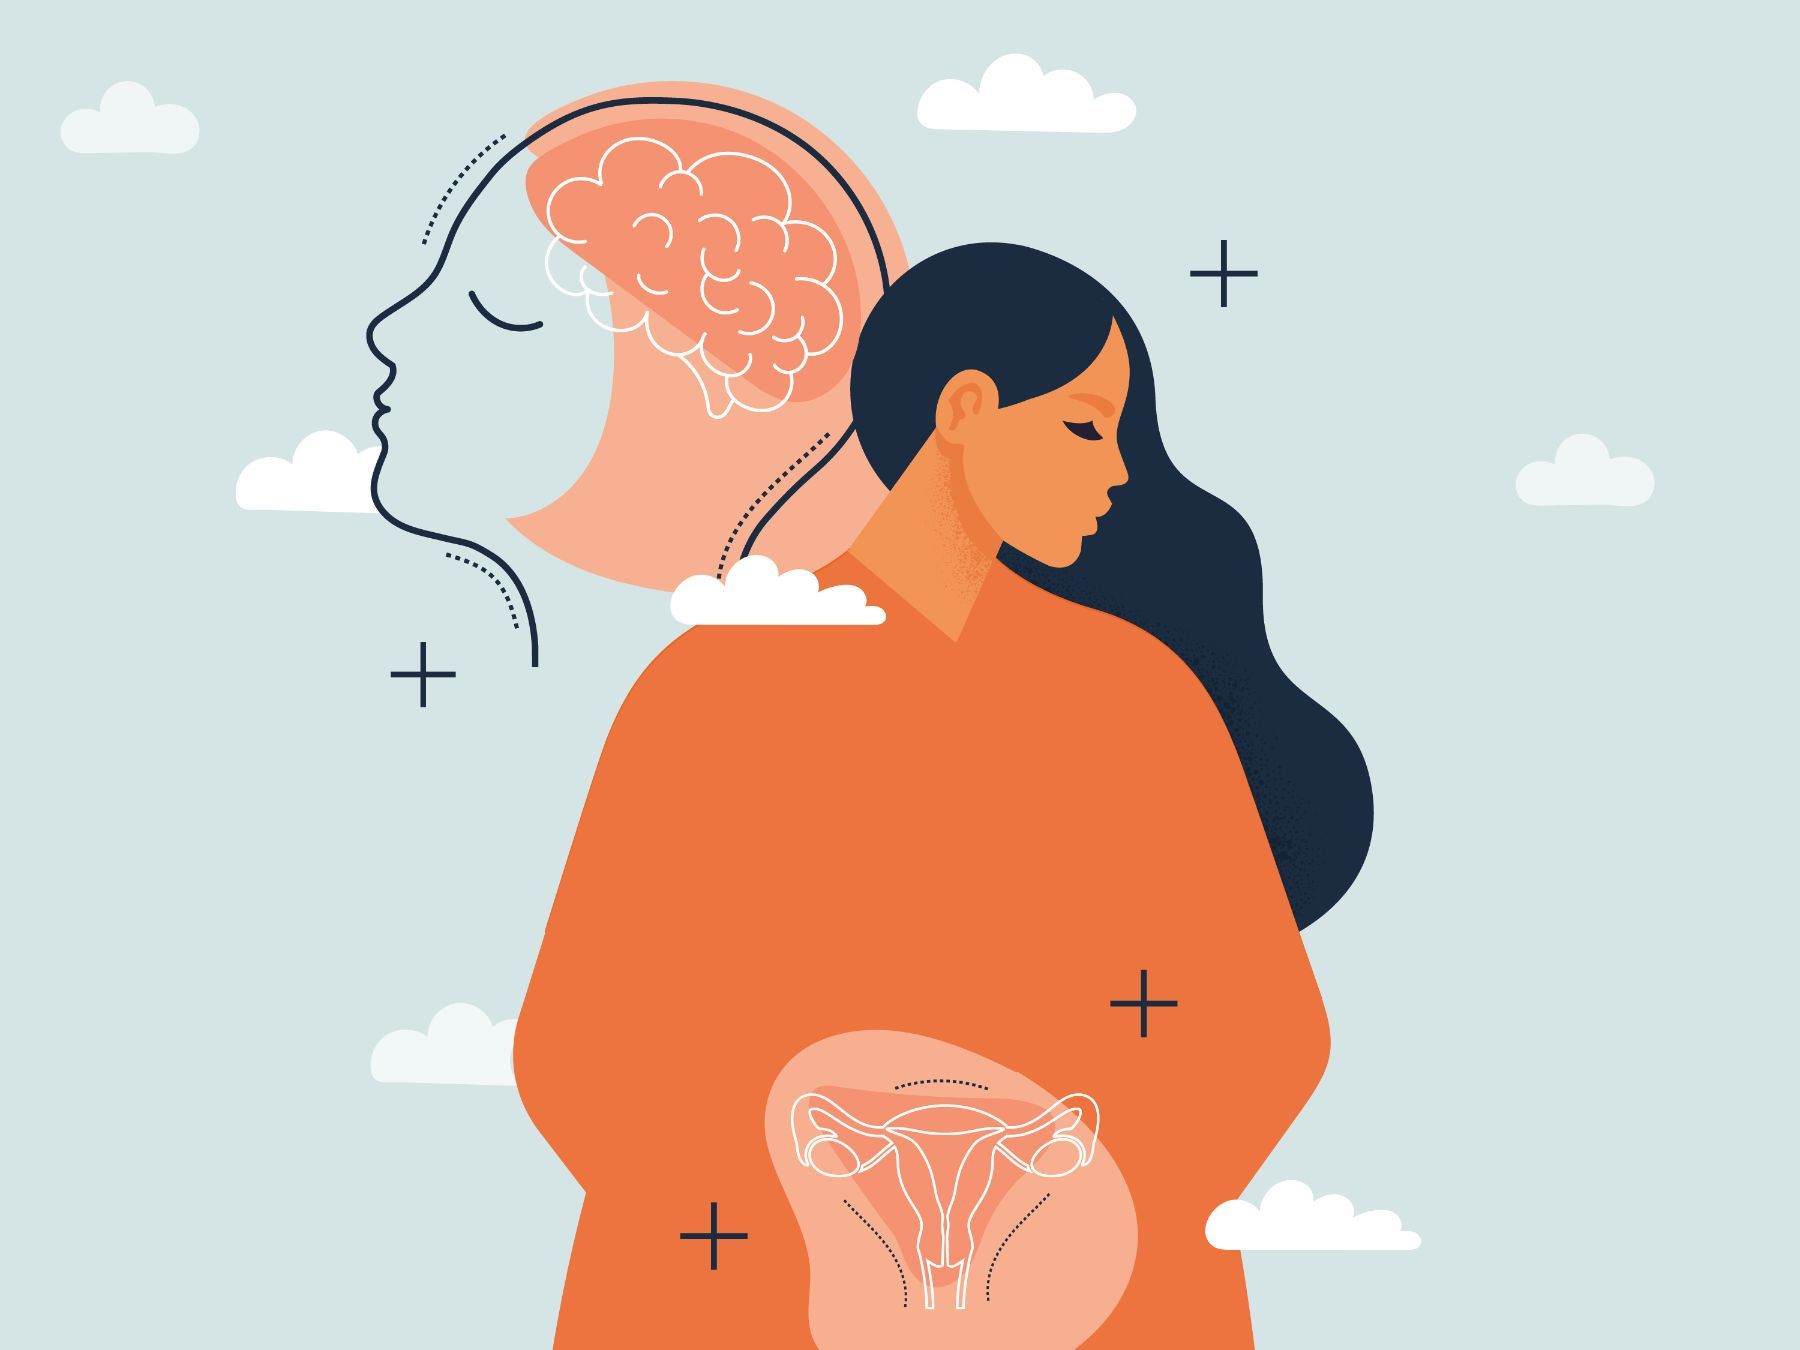 Research on Aging, Memory, and Brain Health to Empower Women